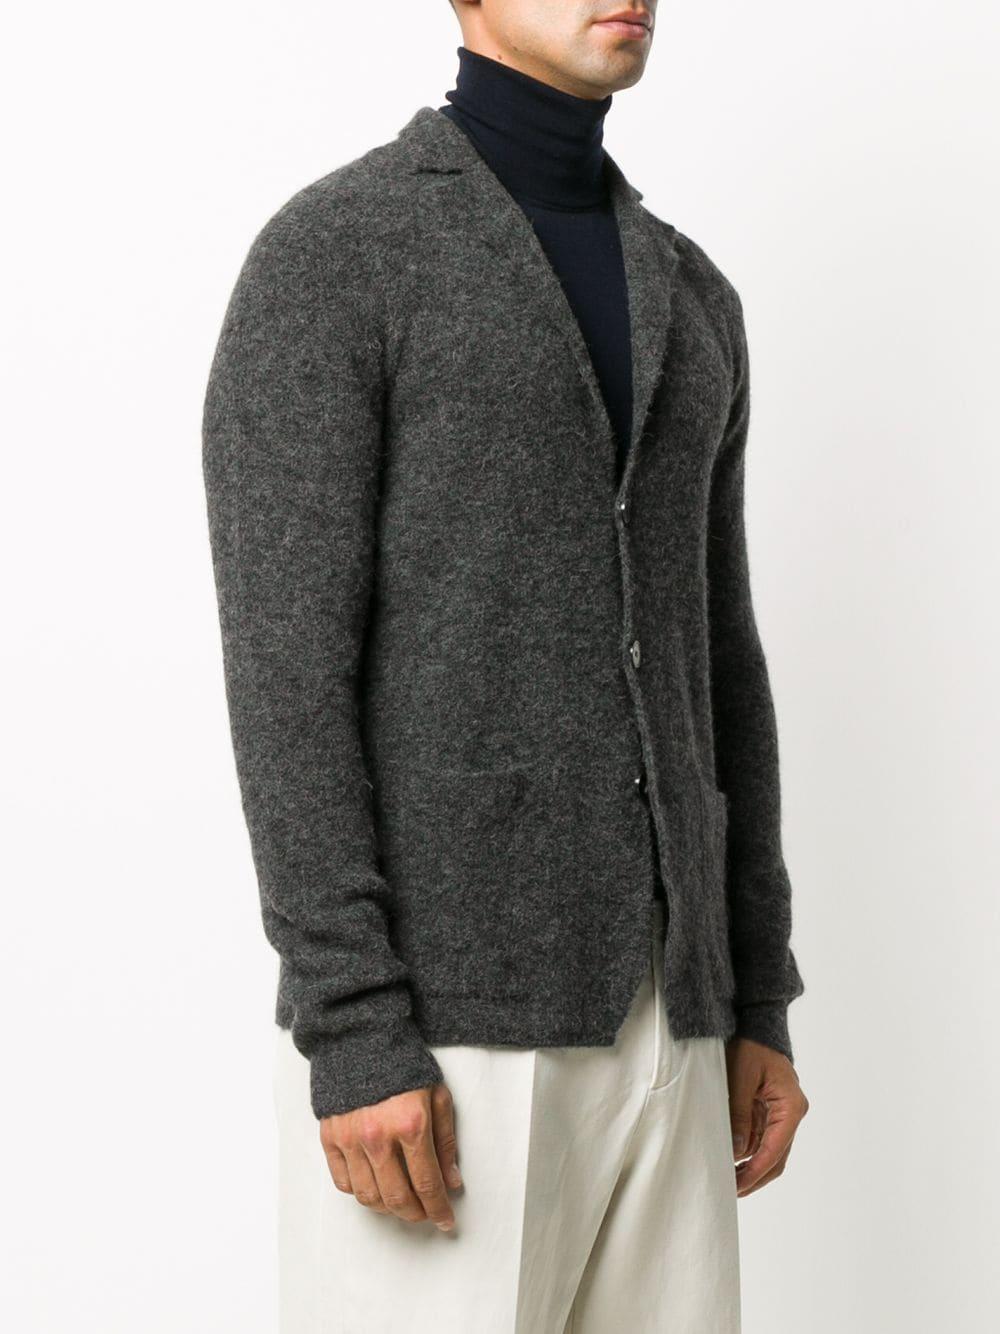 Roberto Collina Notched Lapel Cardigan in Grey (Gray) for Men - Lyst